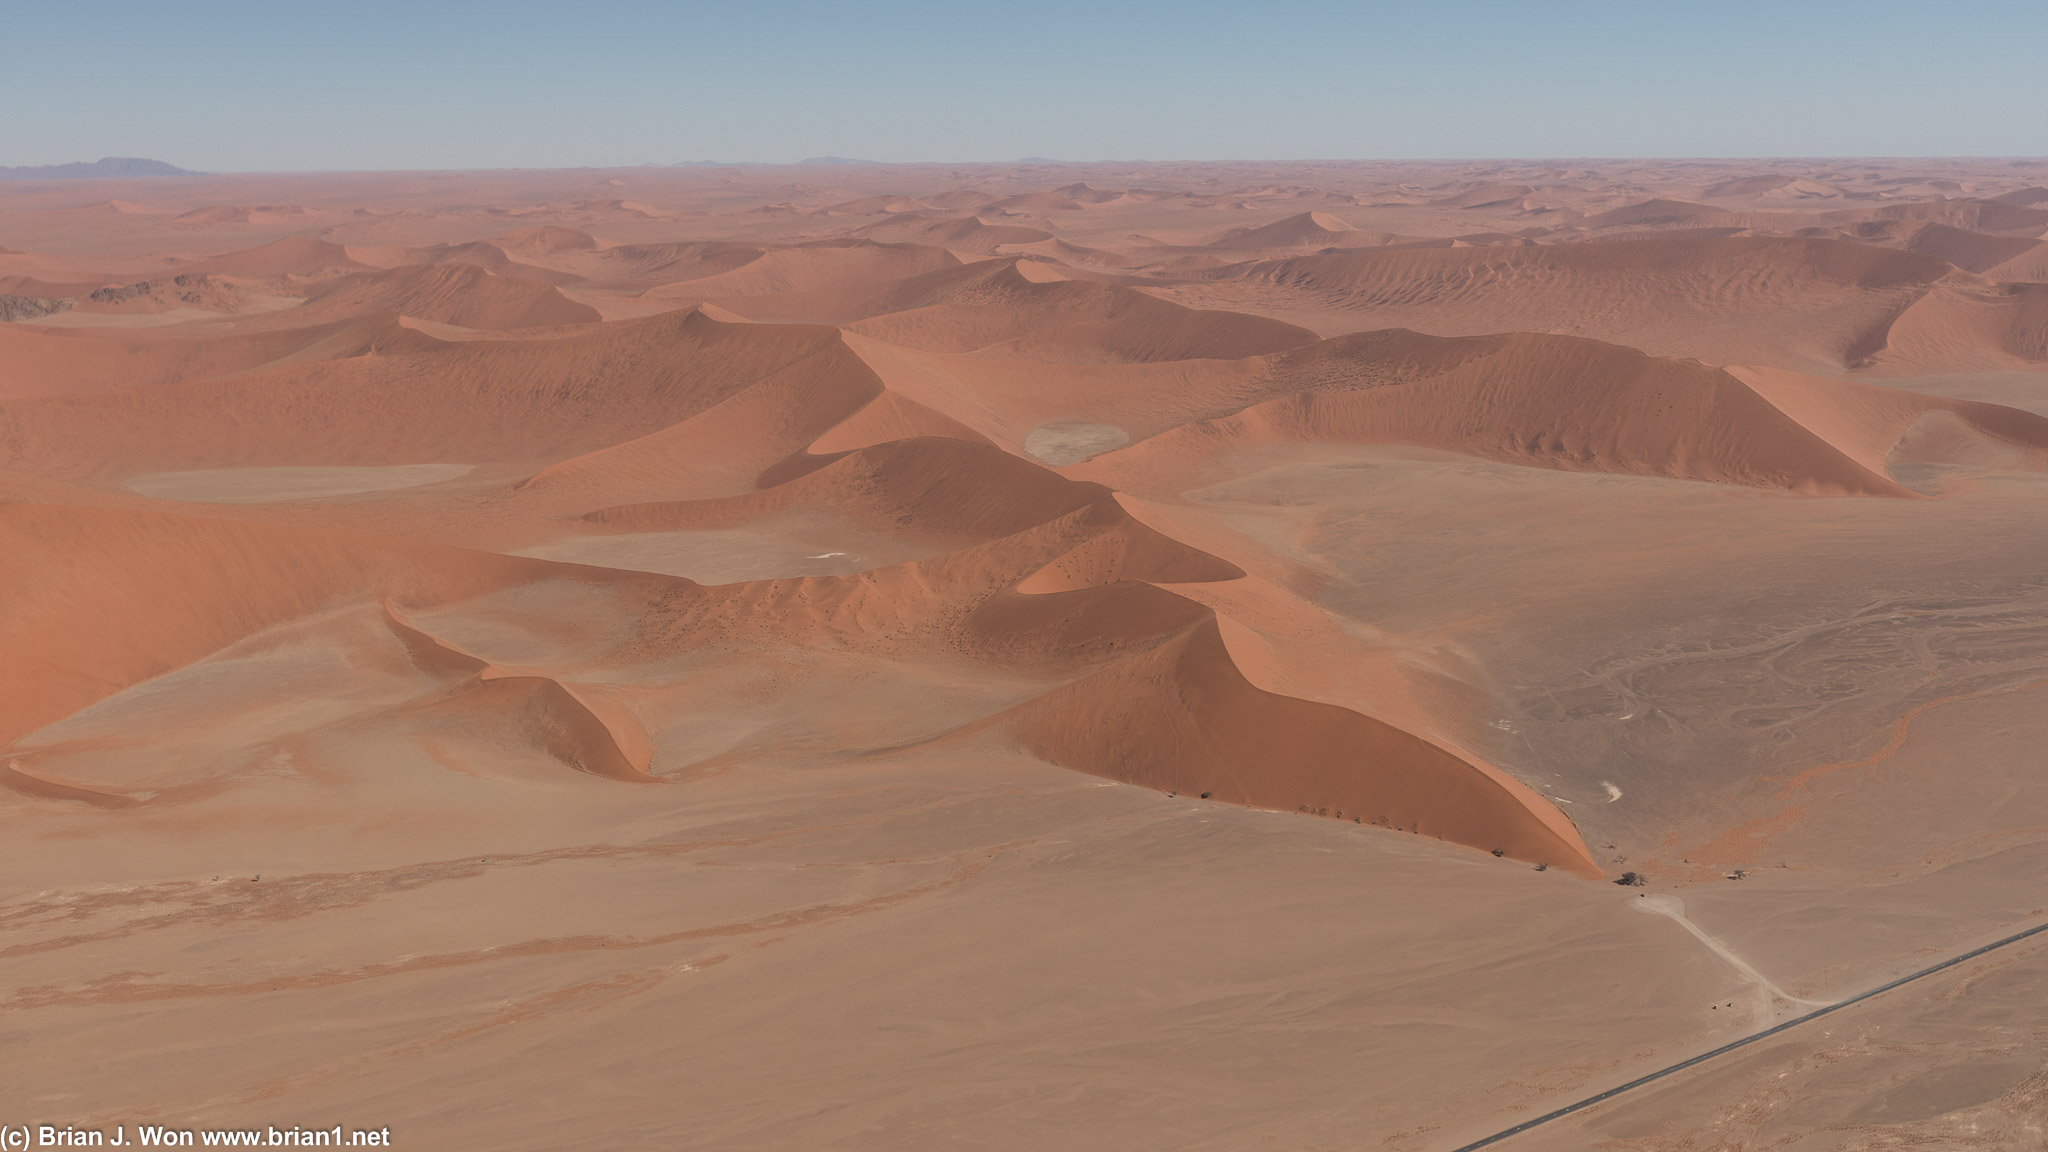 Lots of star-type sand dunes, with Dune 45 in the foreground.